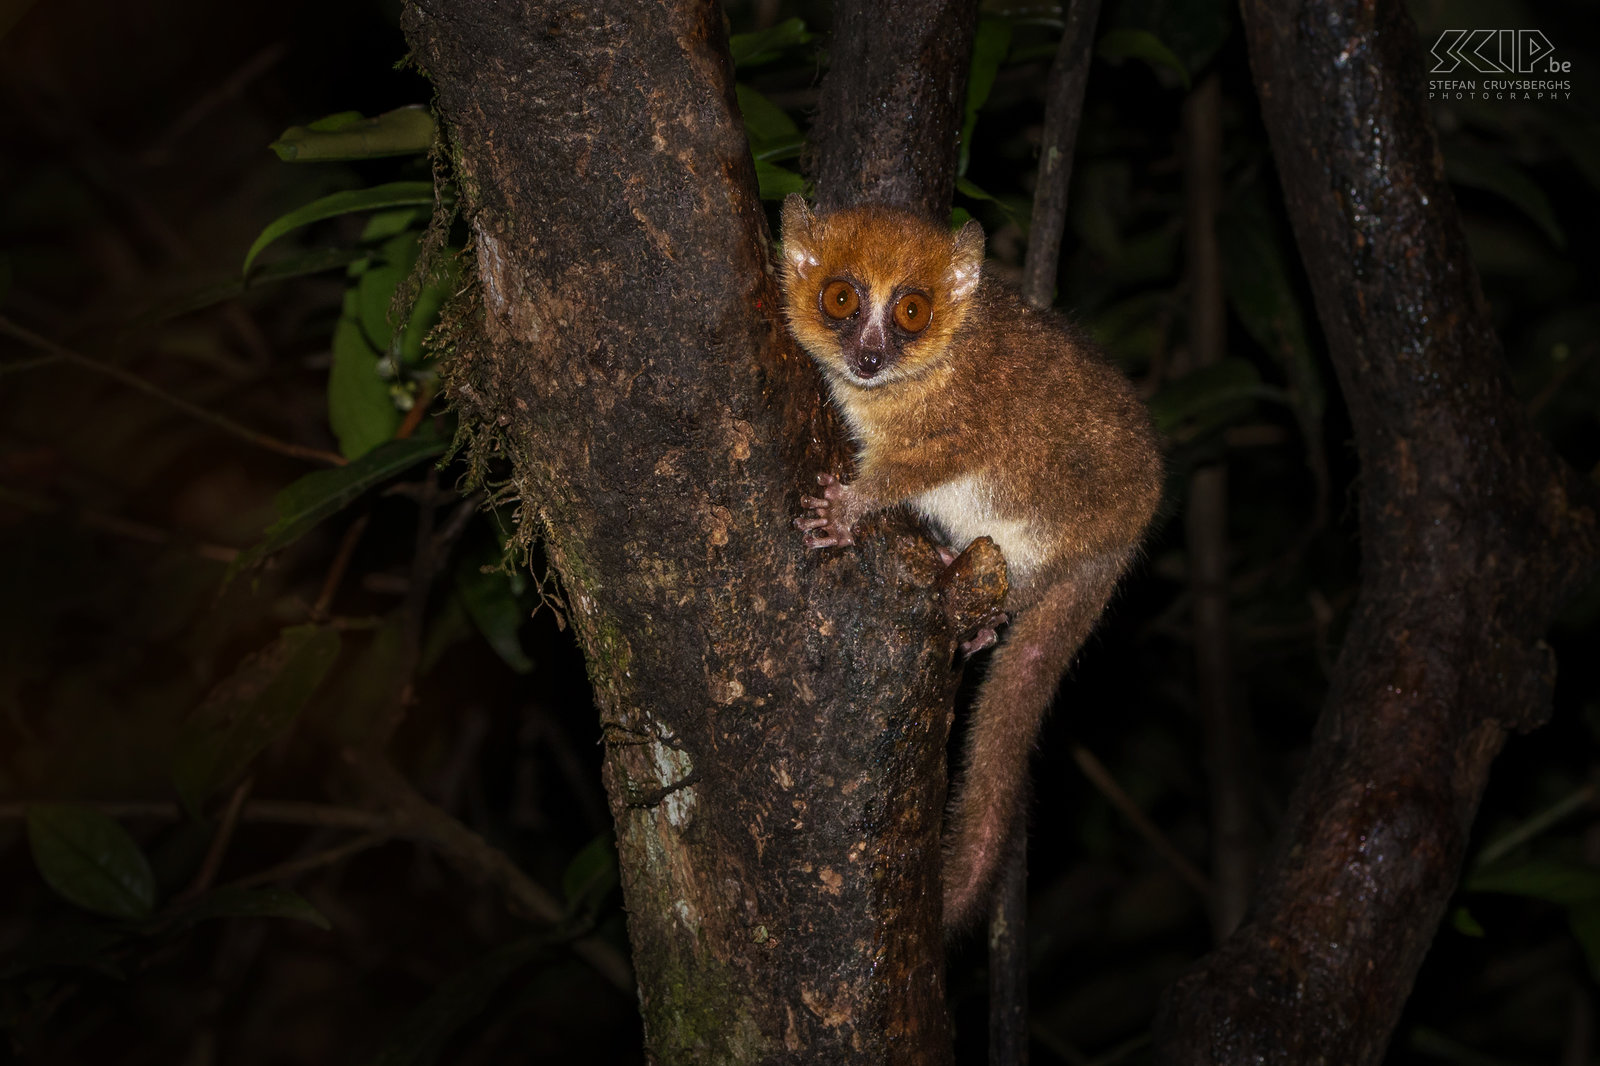 Ranomafana - Brown mouse lemur The brown mouse lemur (Microcebus rufus) is not only the smallest lemur but also one of the smallest primates in the world.  Stefan Cruysberghs